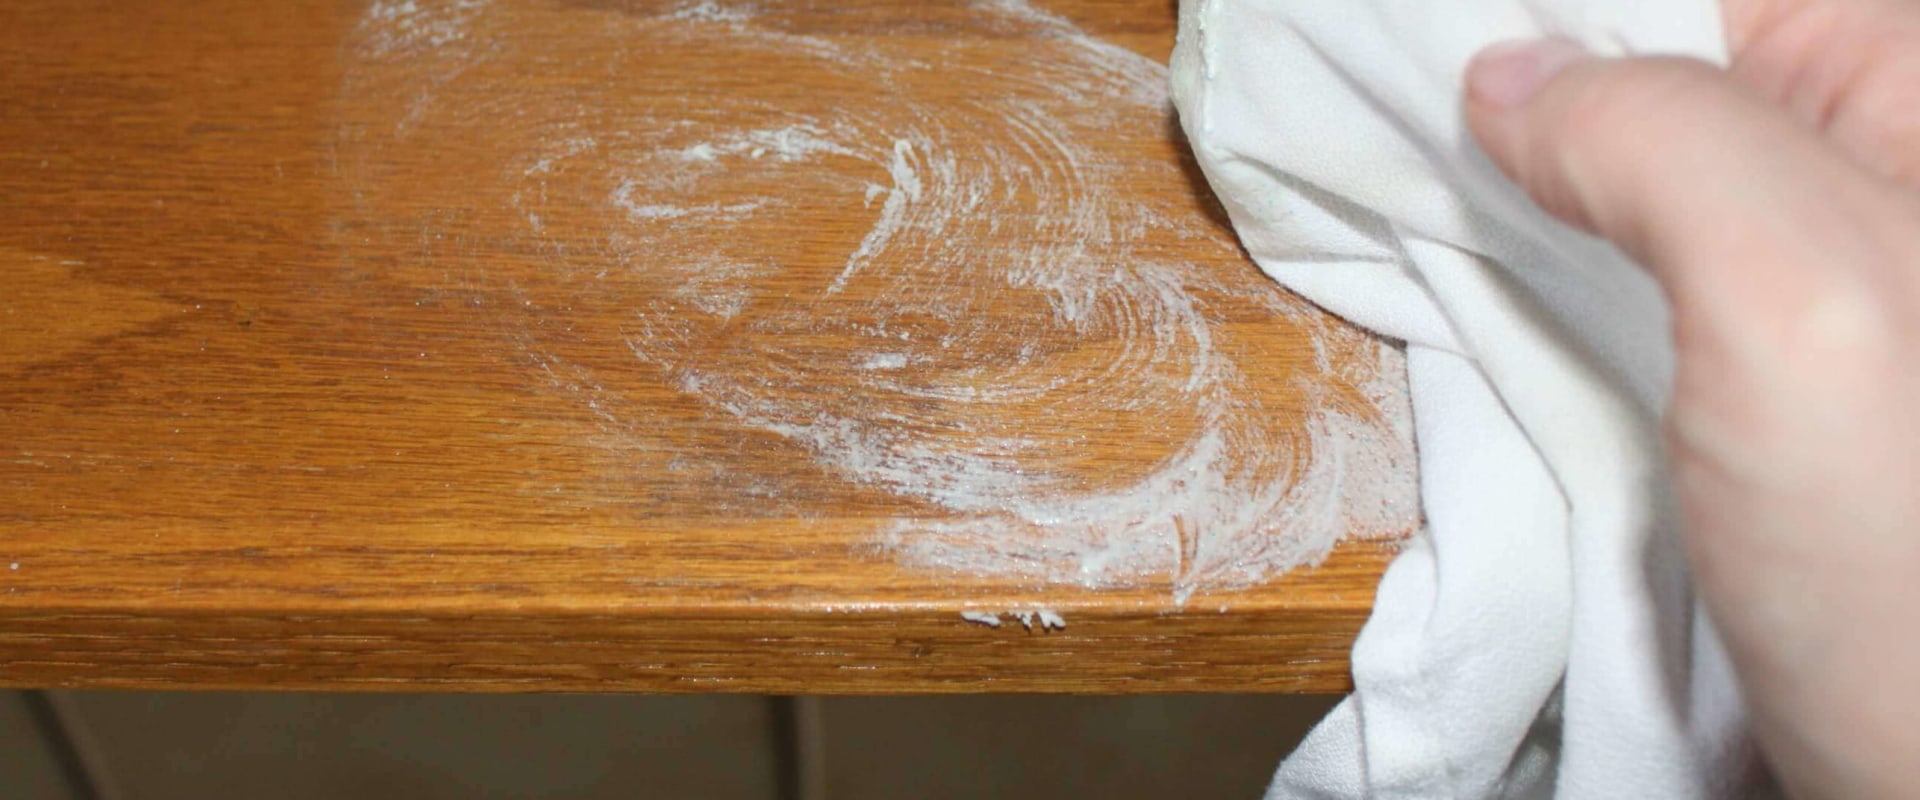 How do you reverse water damage on wood?